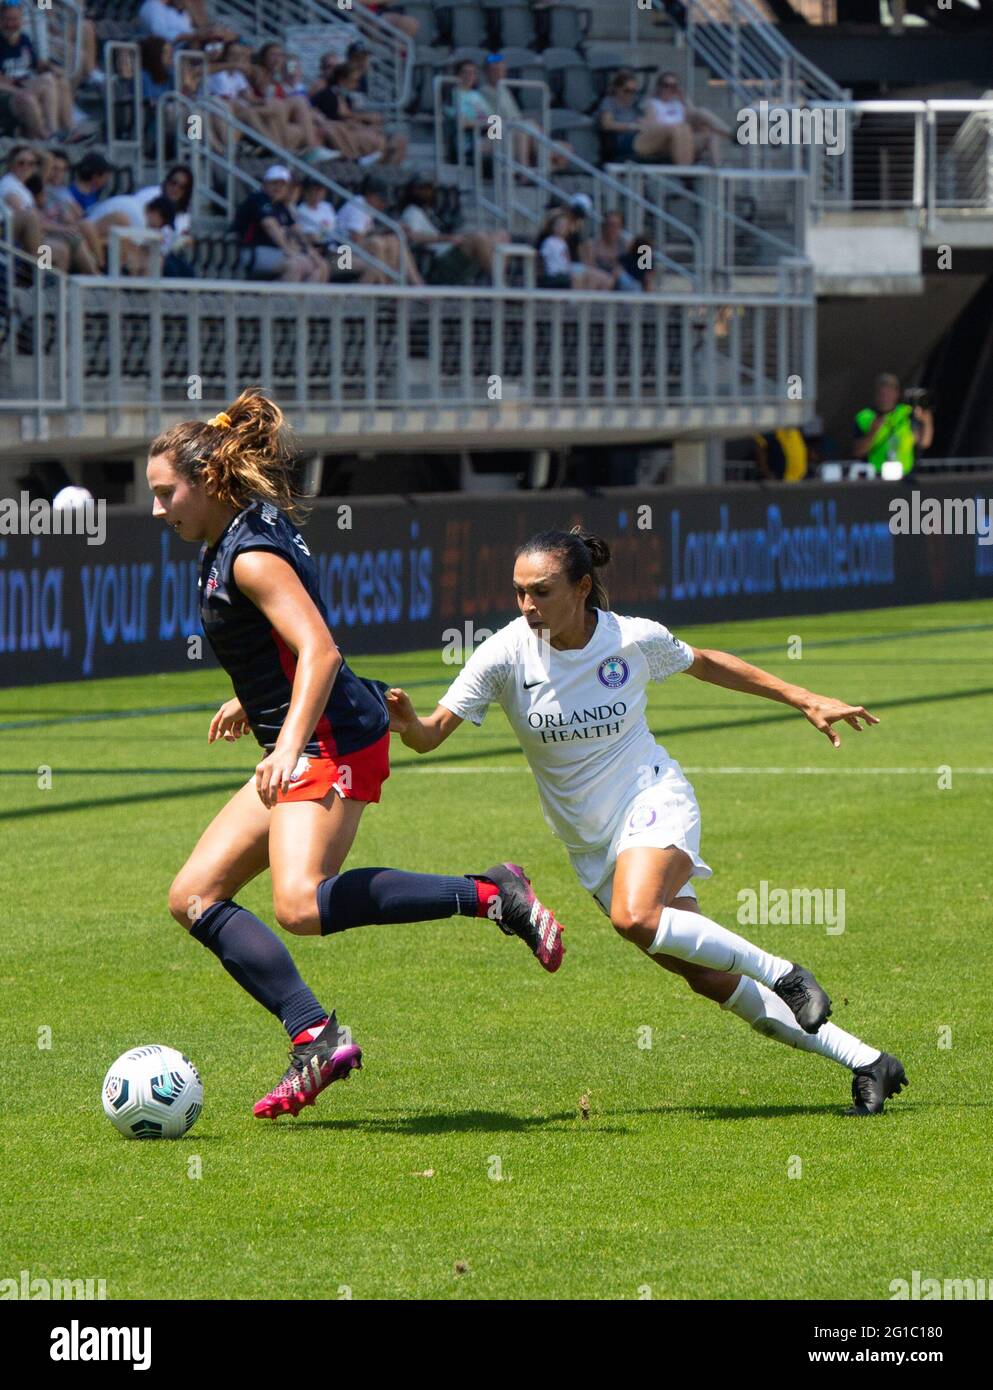 Washington D.C, United States. 06th June, 2021. Sam Staab #3 in action during the Washington Spirit's game against Orlando Pride at Audi Field in Washington, DC NO COMMERCIAL USAGE. Credit: SPP Sport Press Photo. /Alamy Live News Stock Photo